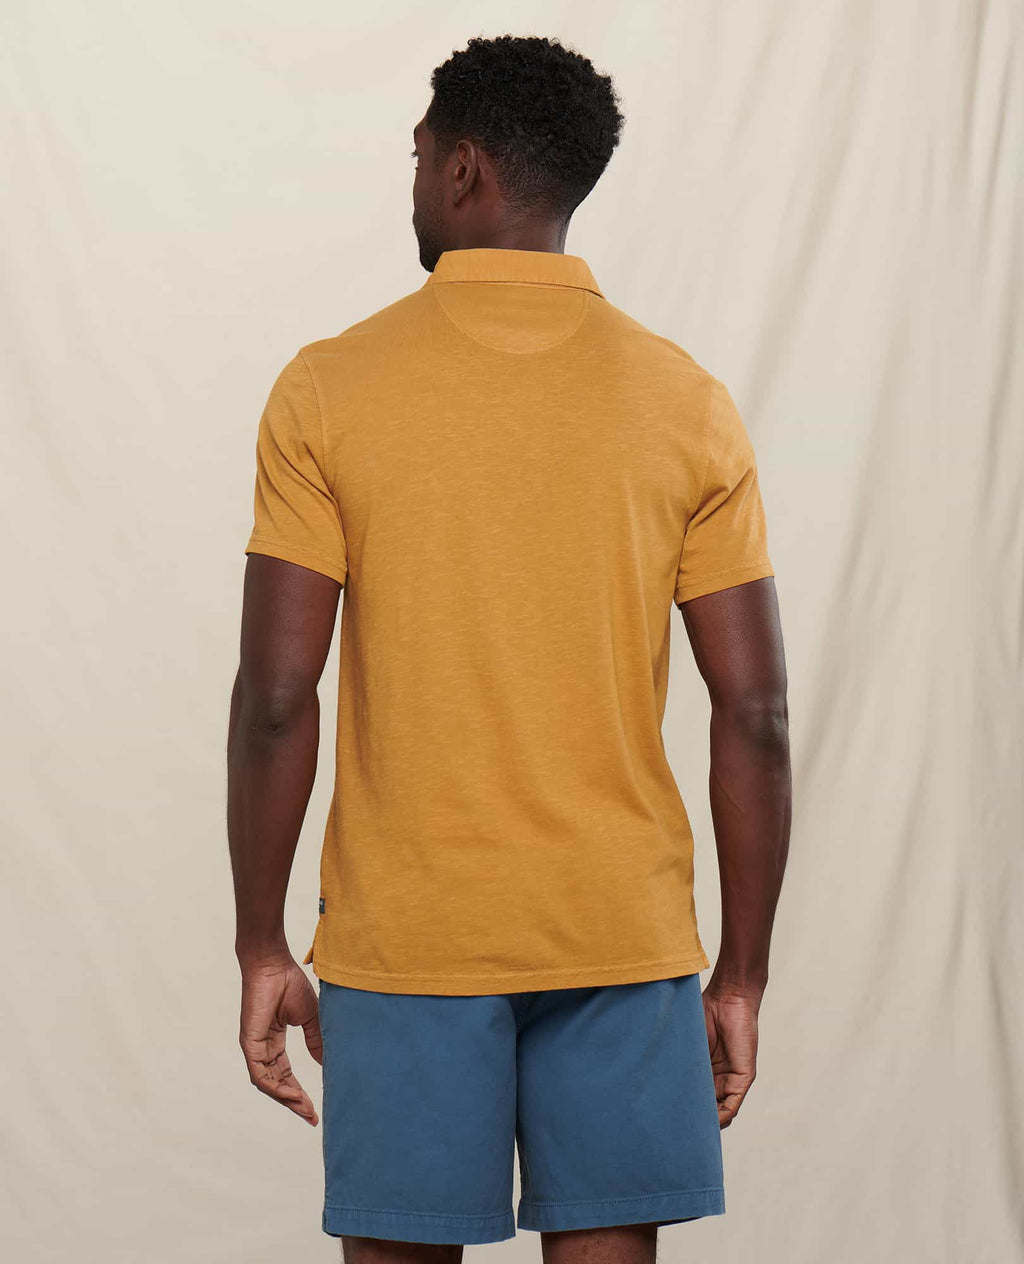 Men's Primo Short Sleeve Polo | Organic Cotton Tee by Toad&Co